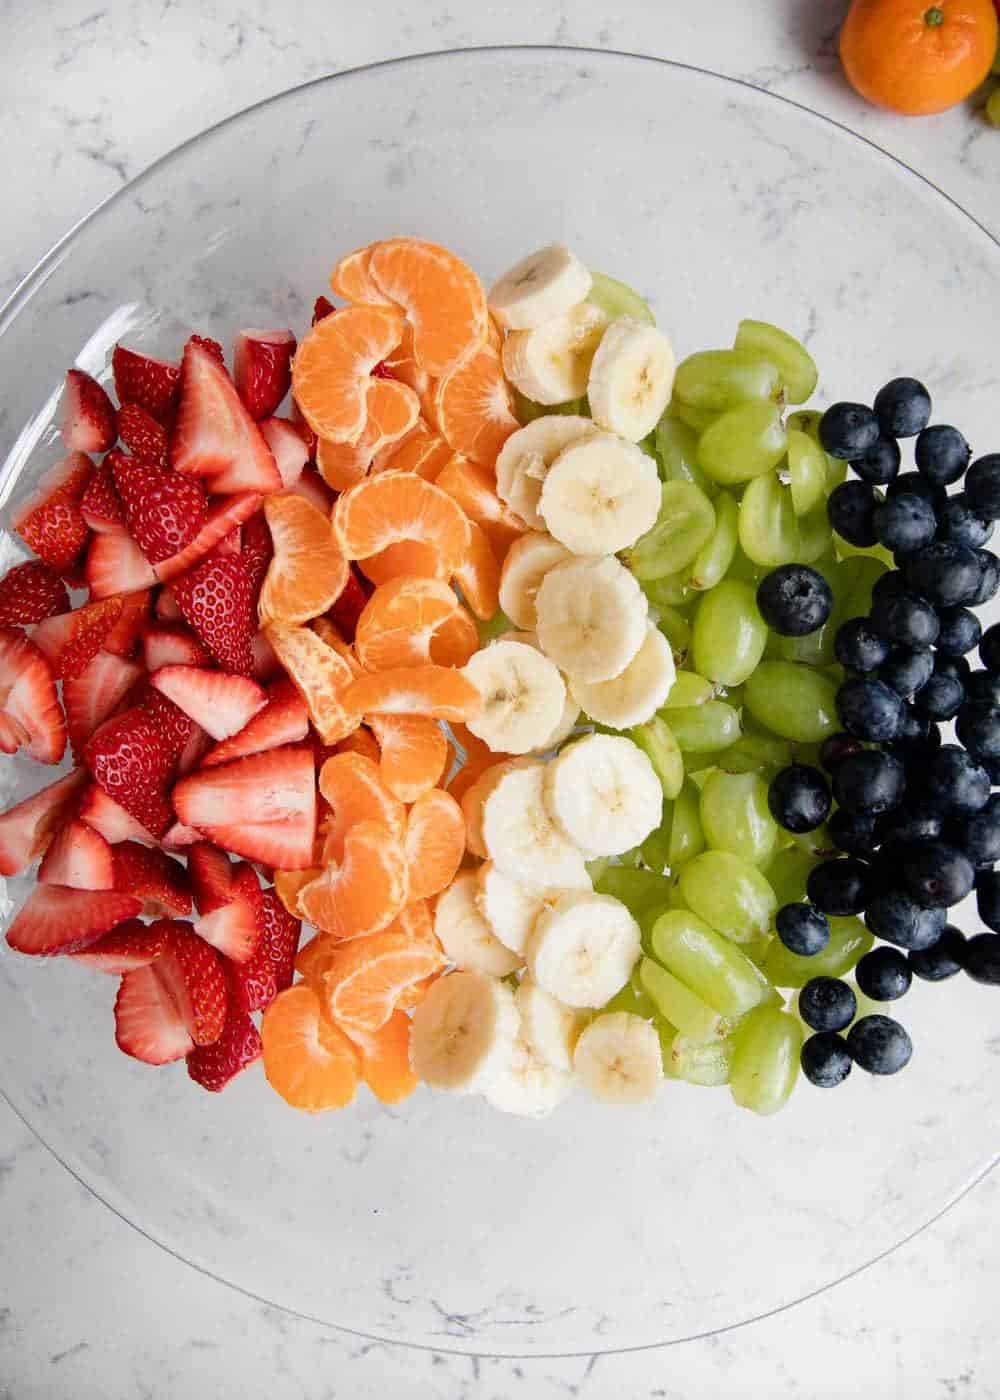 Strawberries, oranges, bananas, grapes, and blueberries are lined up on a glass plate. 